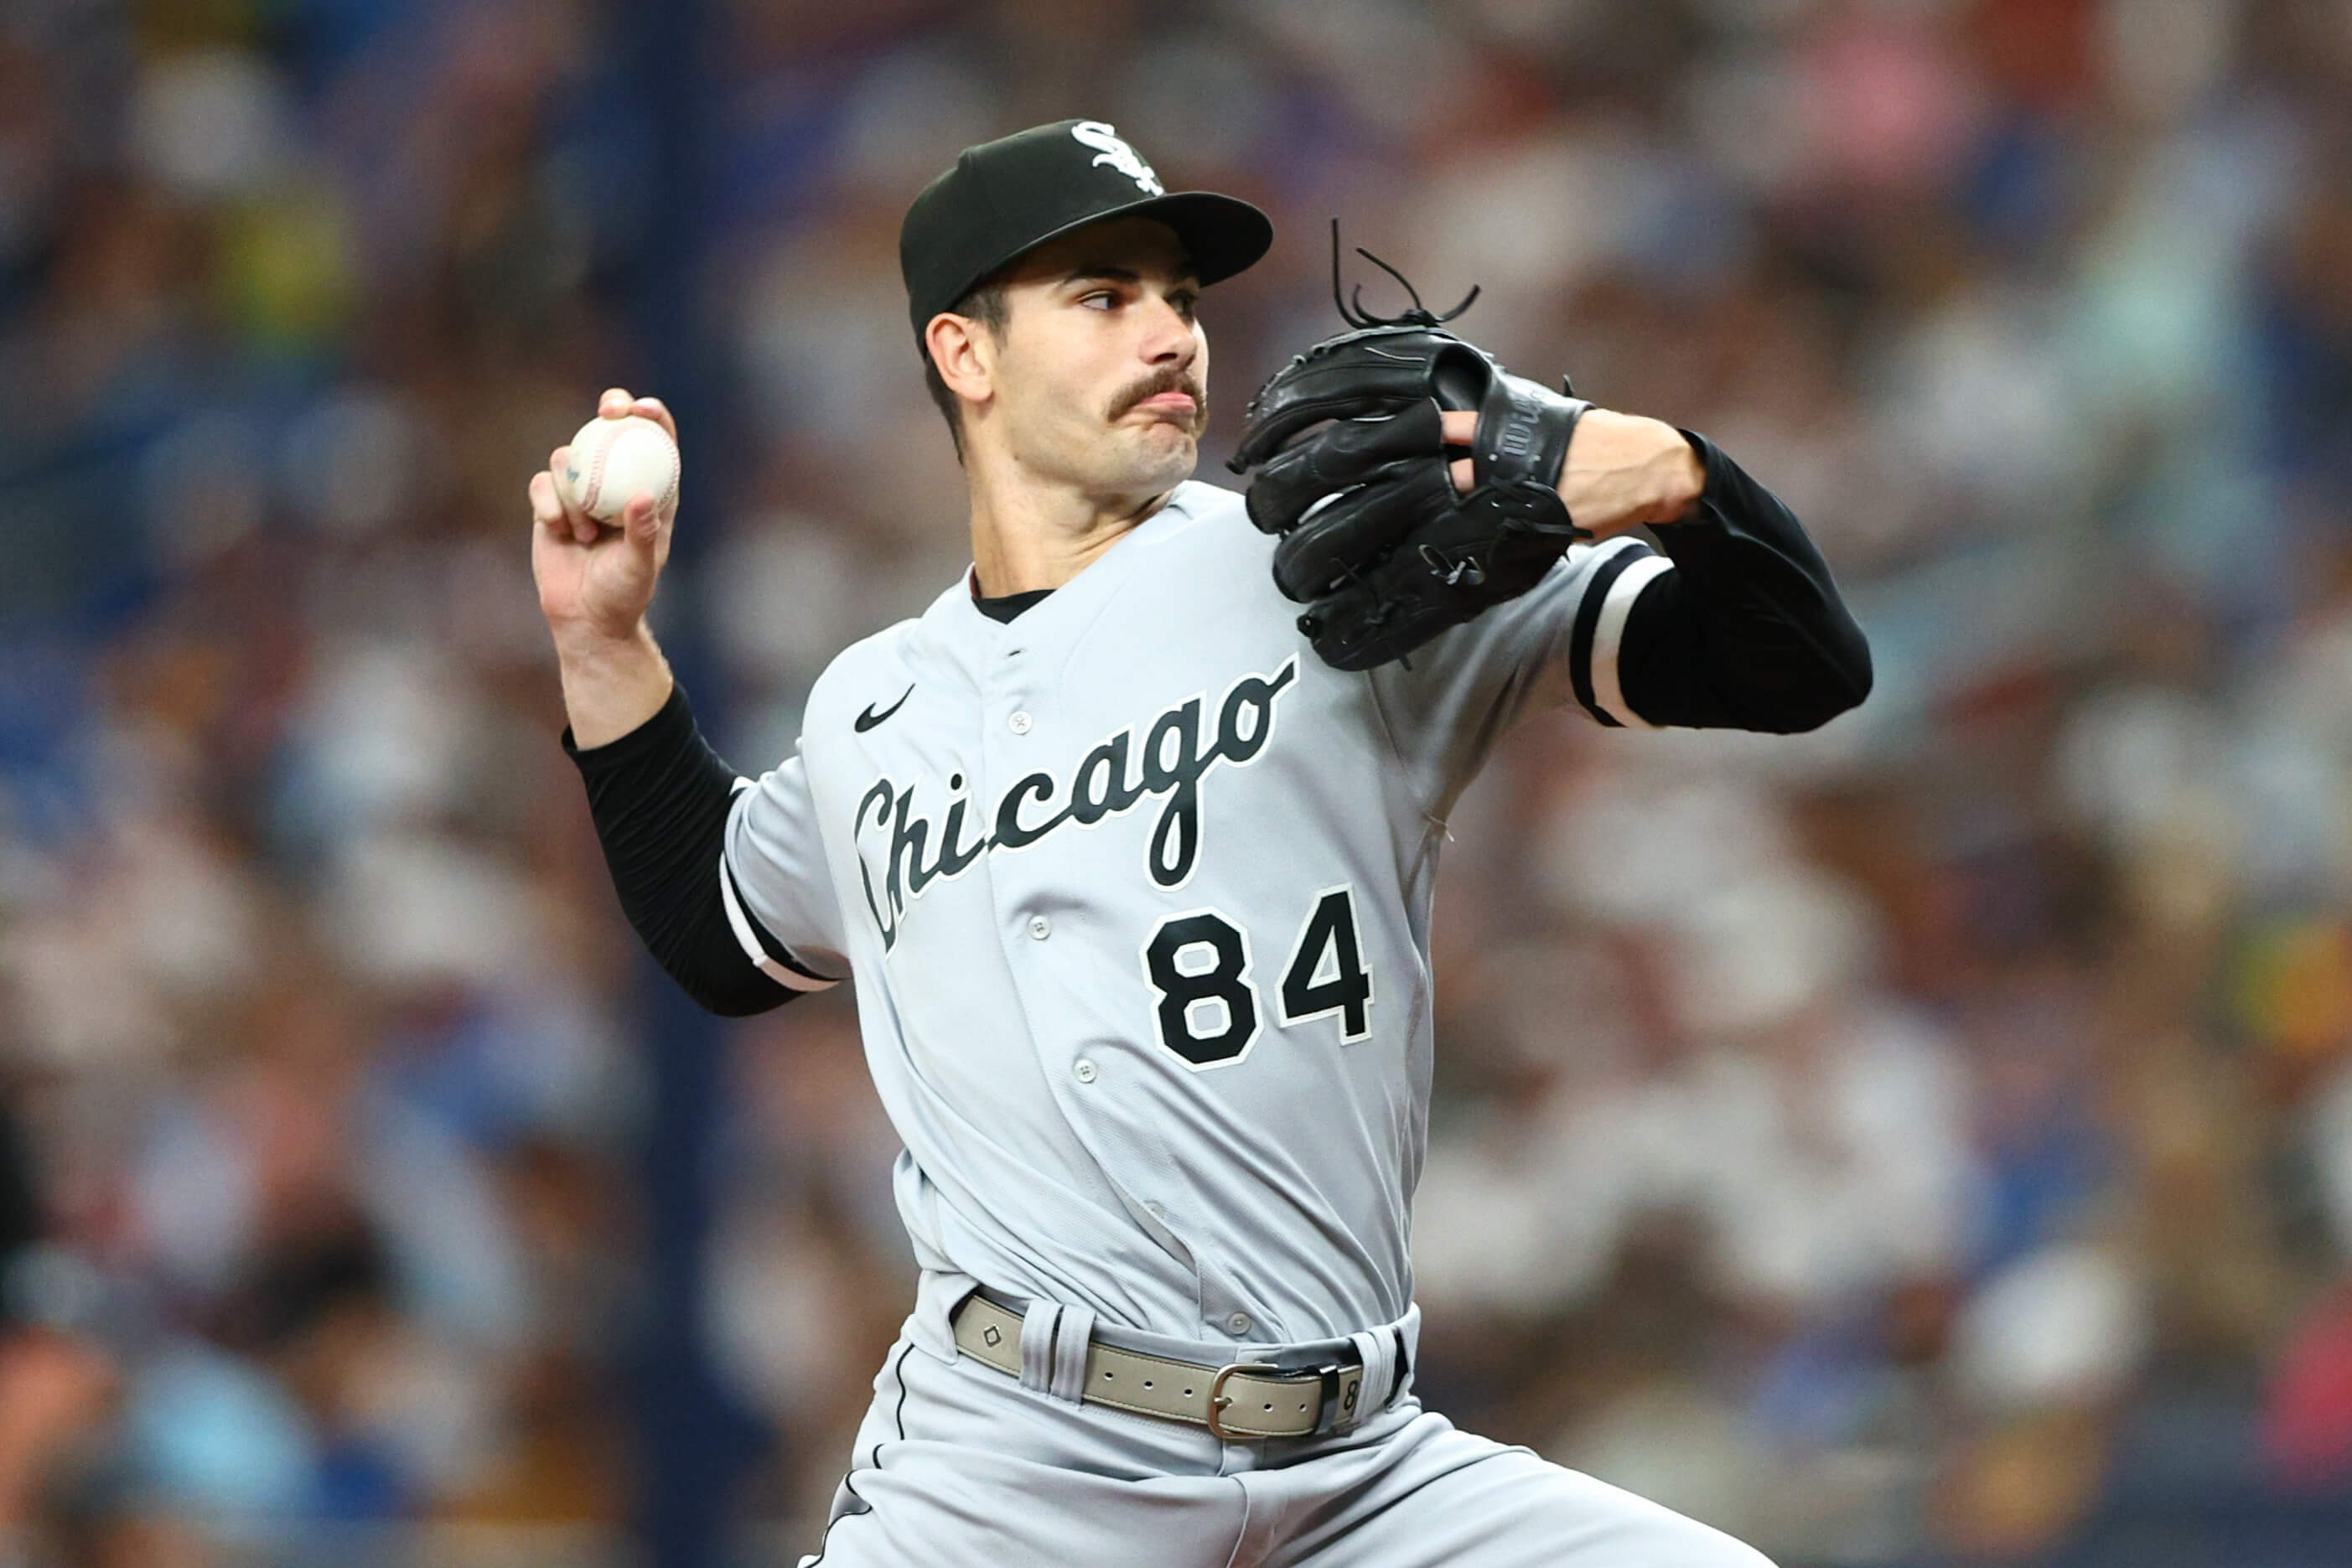 White Sox vs. Angels: Odds, spread, over/under - May 30